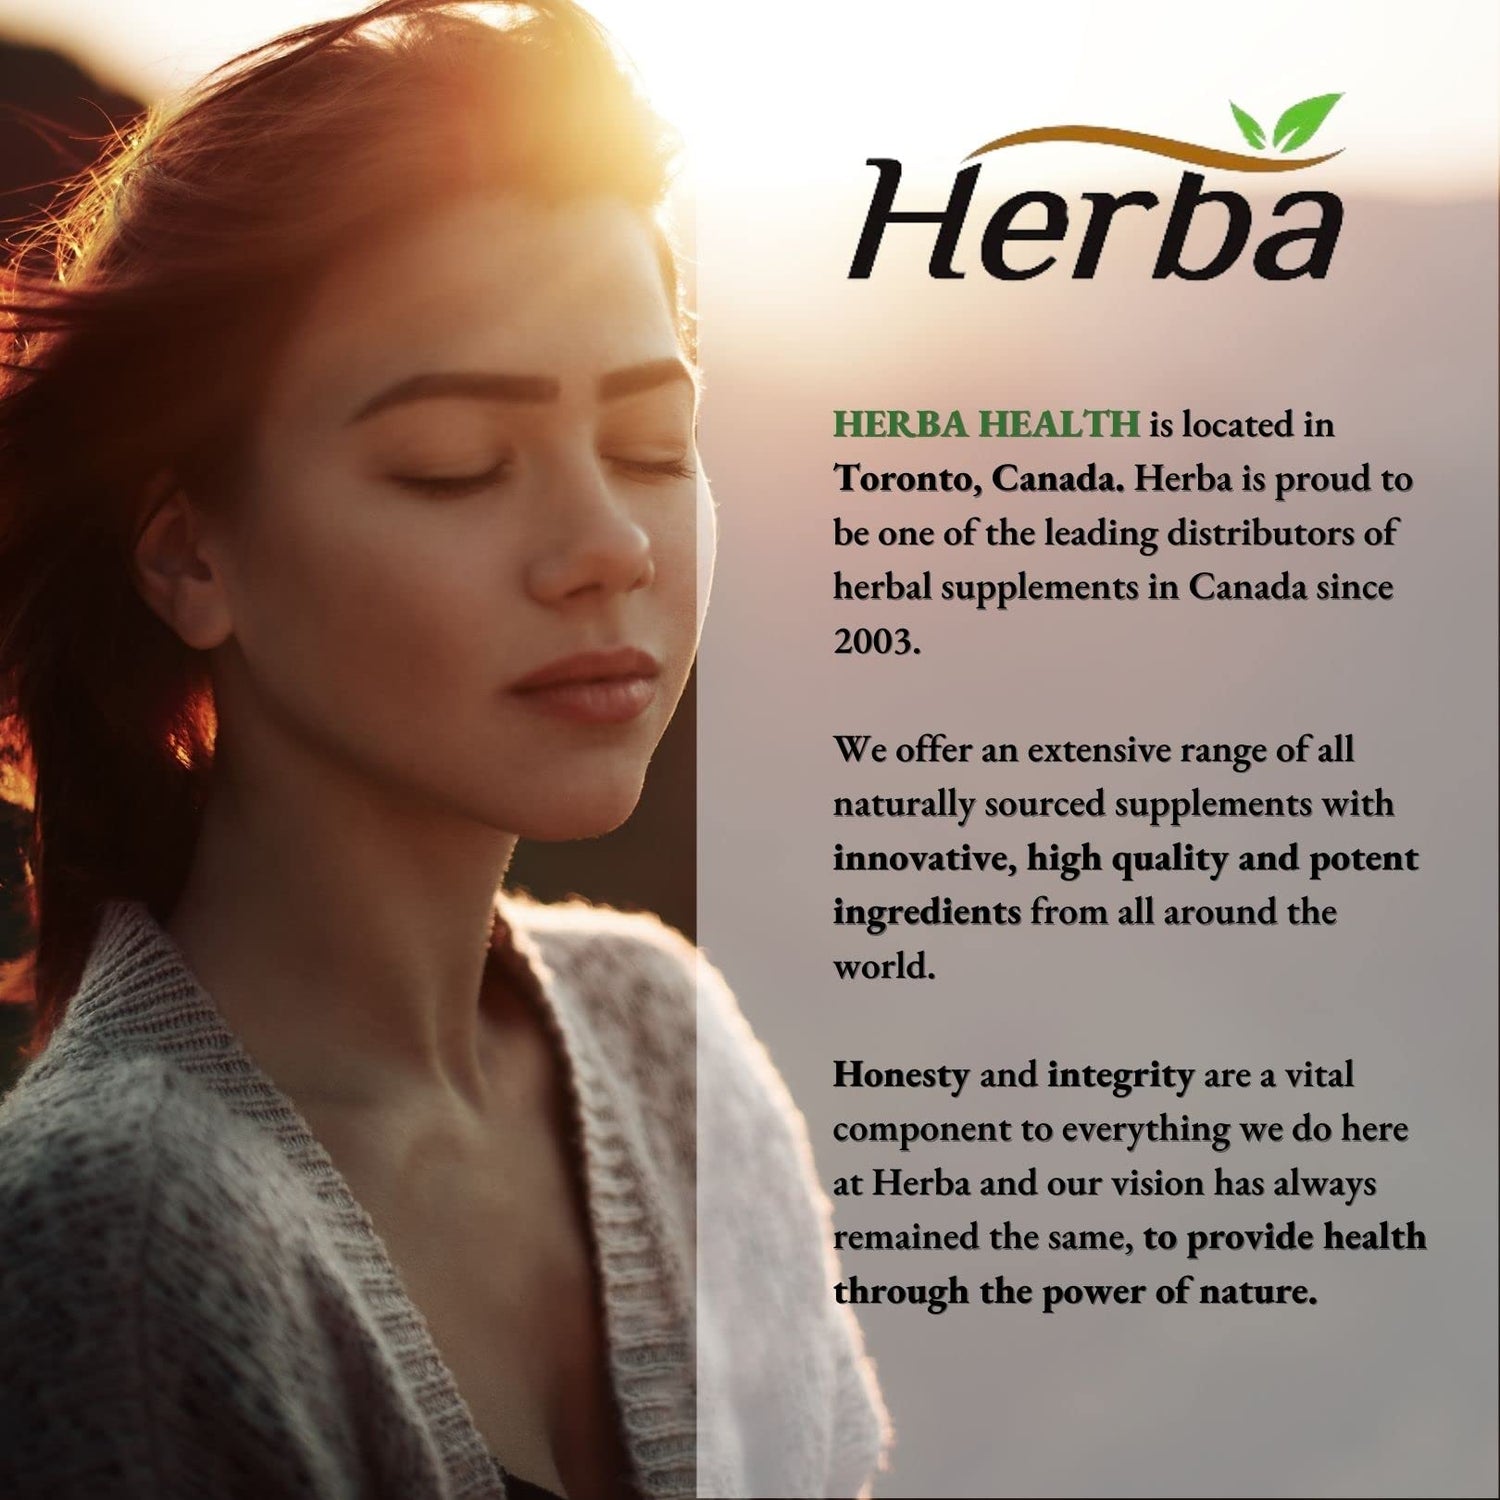 Herba Resveratrol Supplement - 120 Capsules | Trans-Resveratrol with Echinacea, Quercetin, Grape Seed Extract, and Aronia